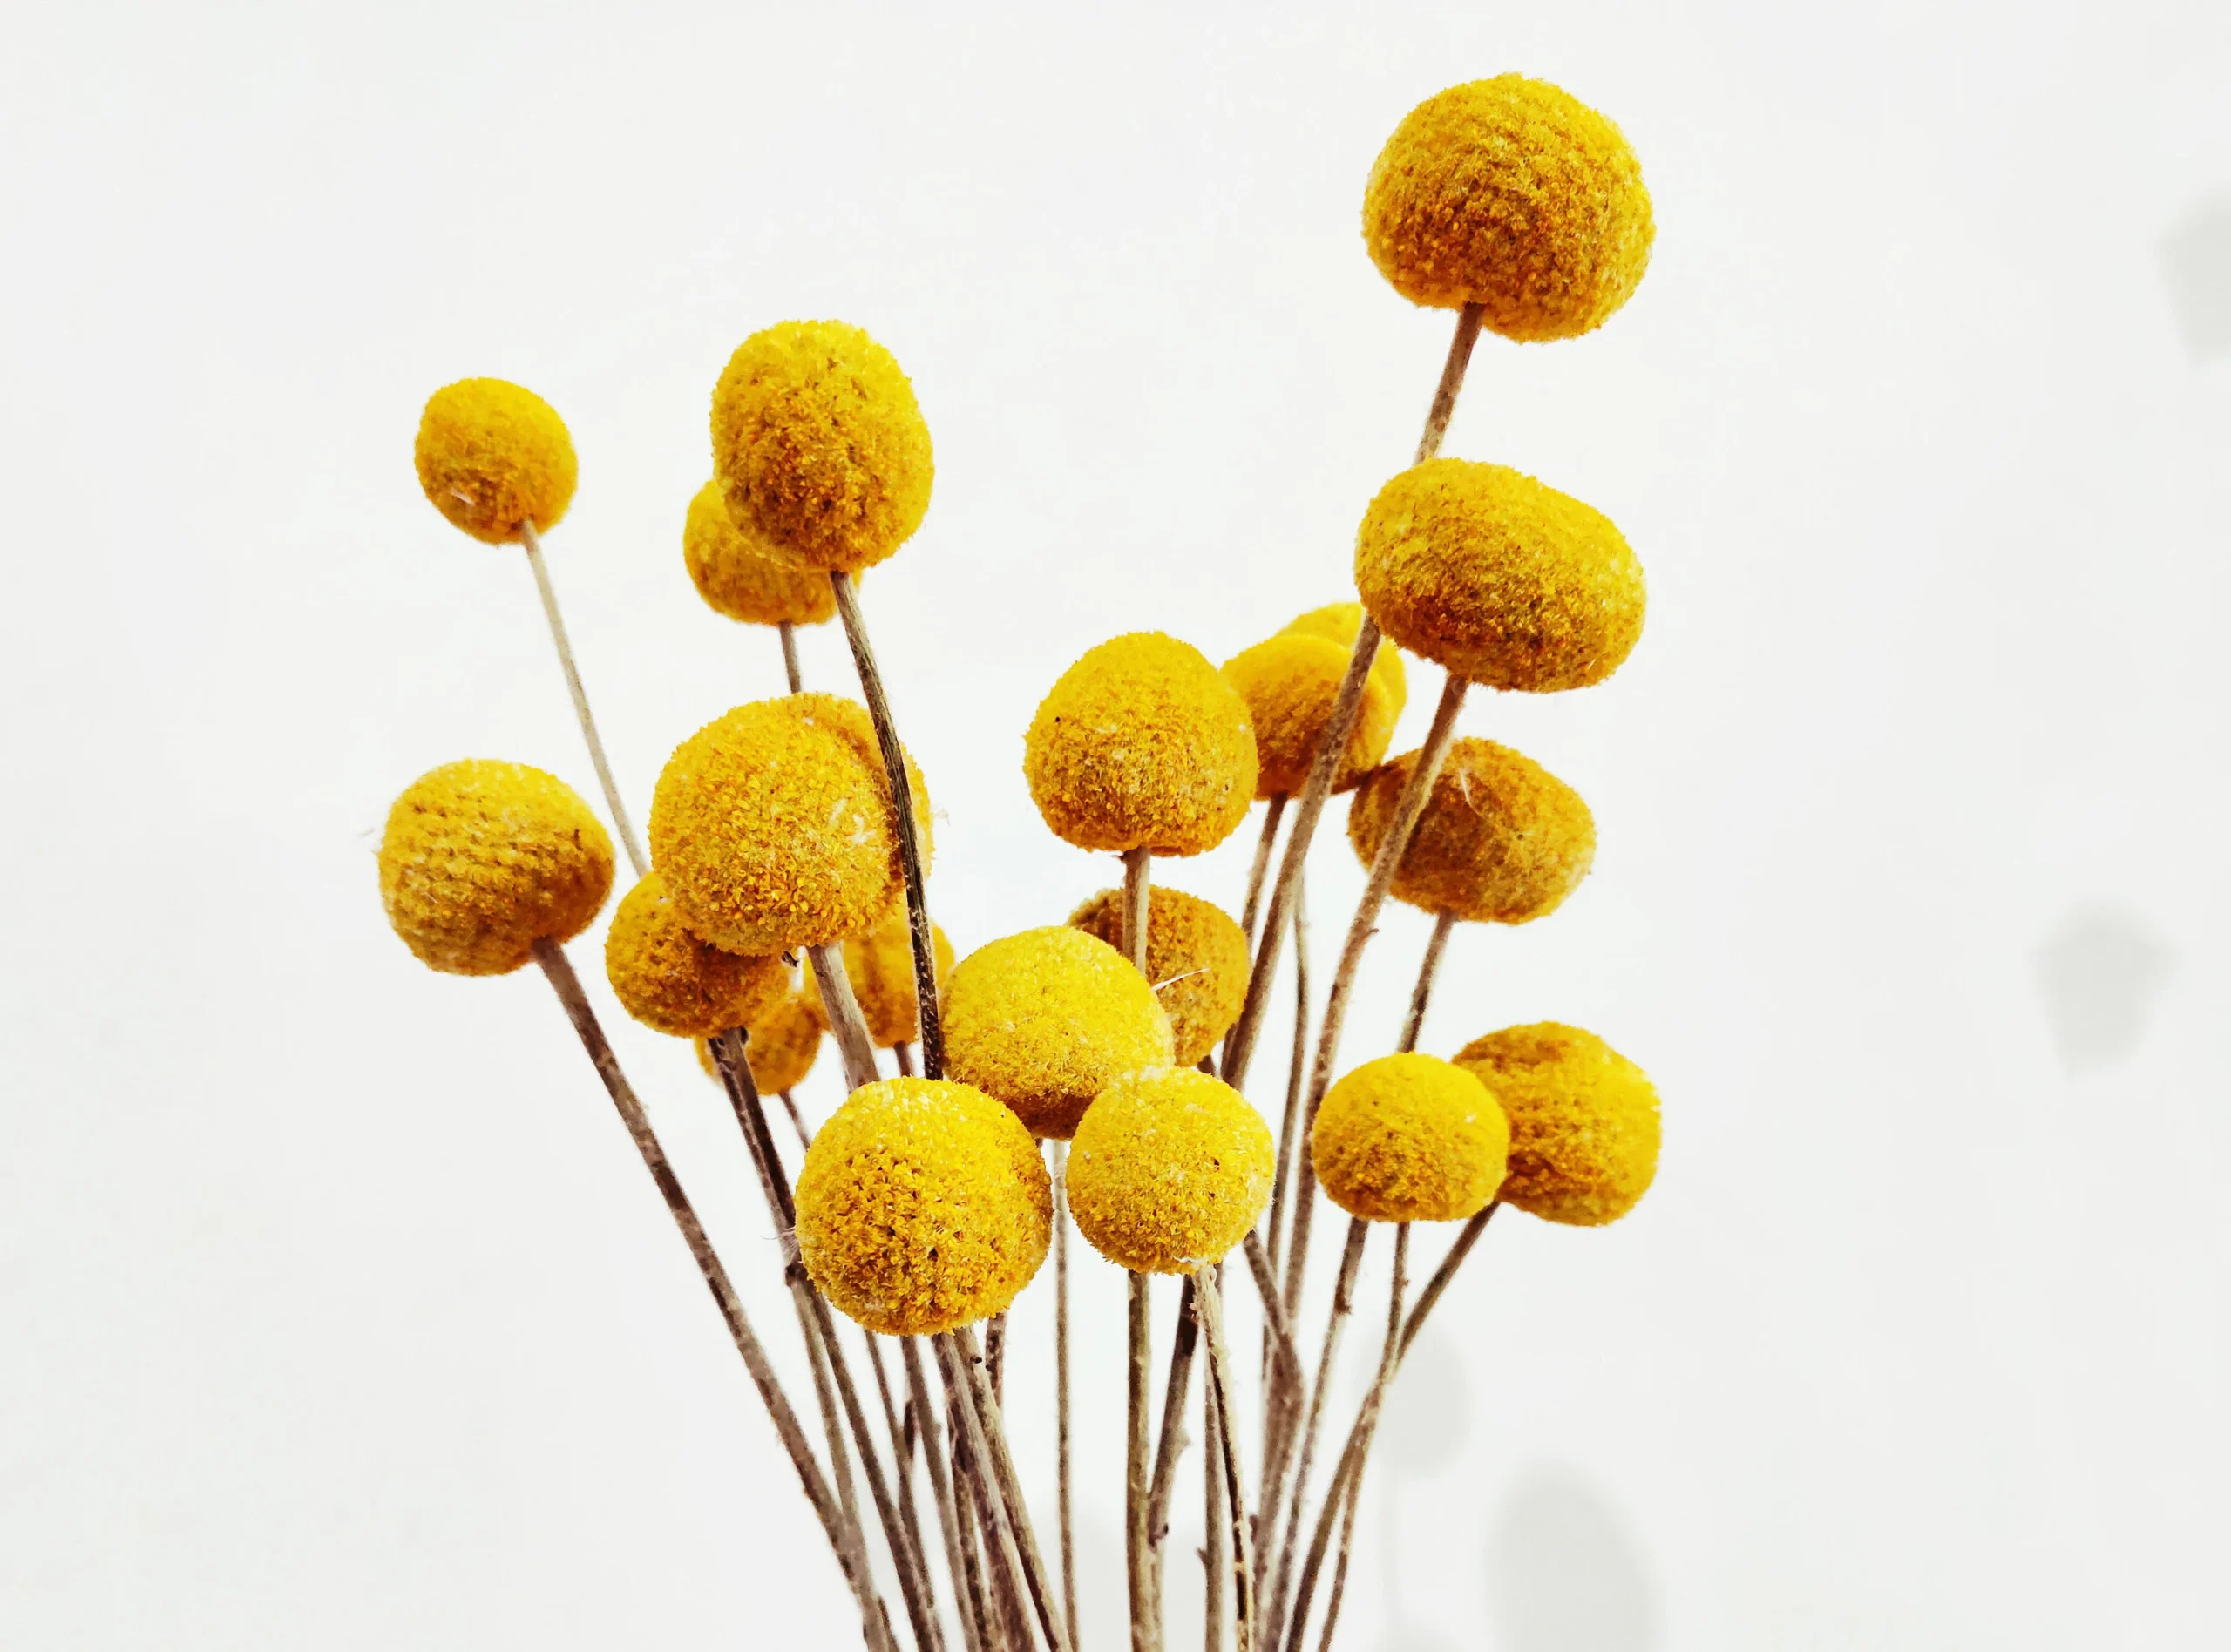 Billy buttons, decor thye house with natural or artificial billy buttons by gardengreen